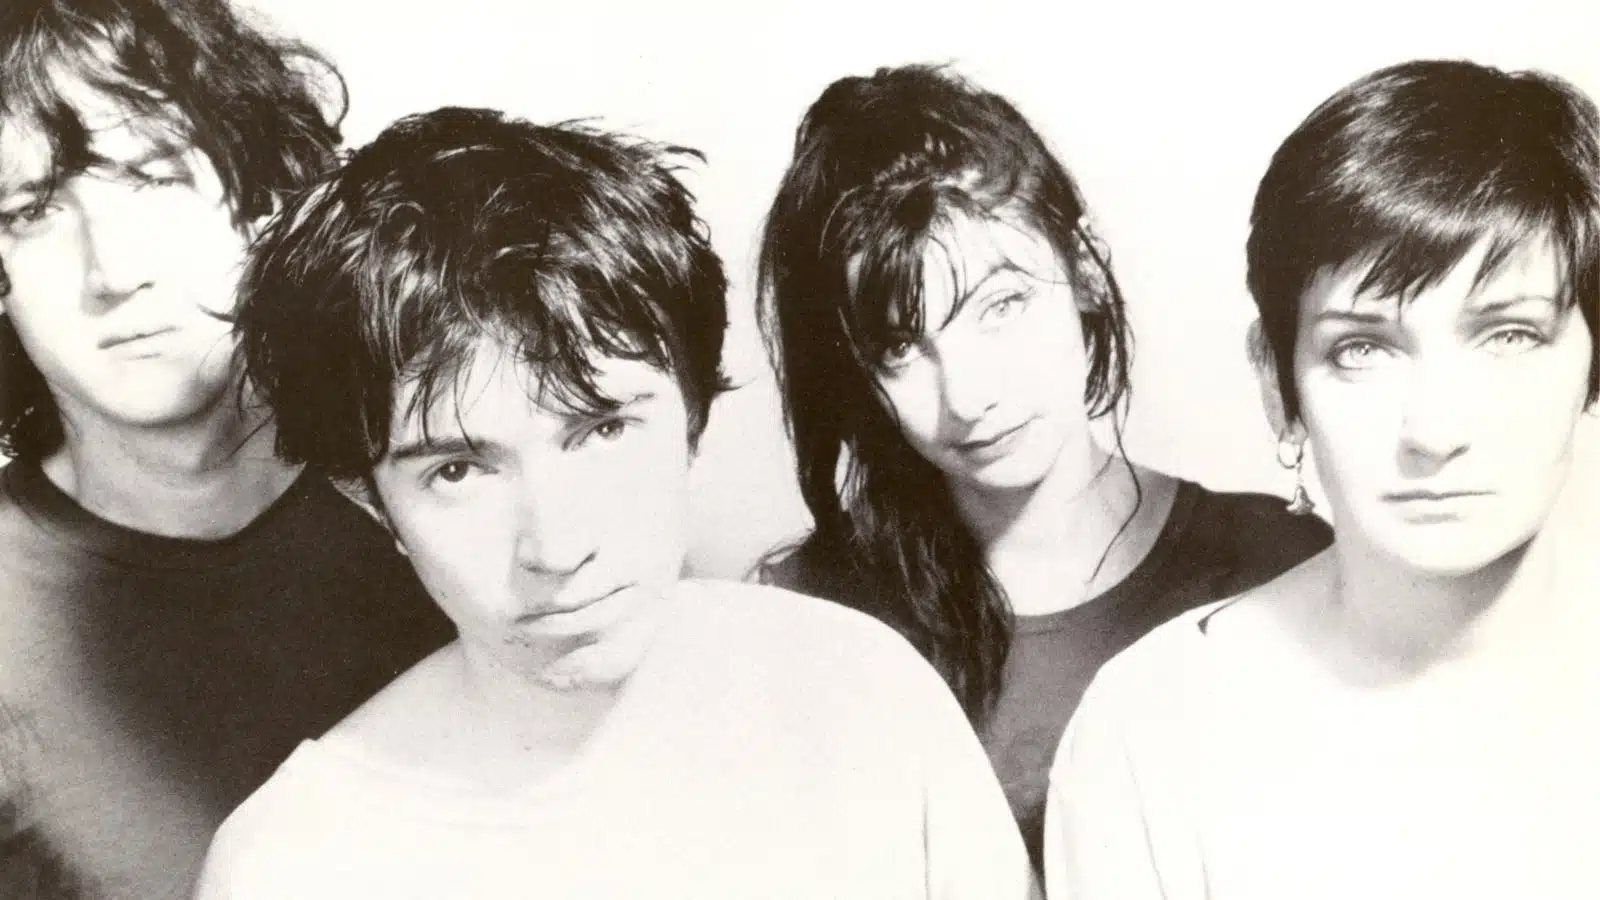 My Bloody Valentine Songs Ranked Worst to Best